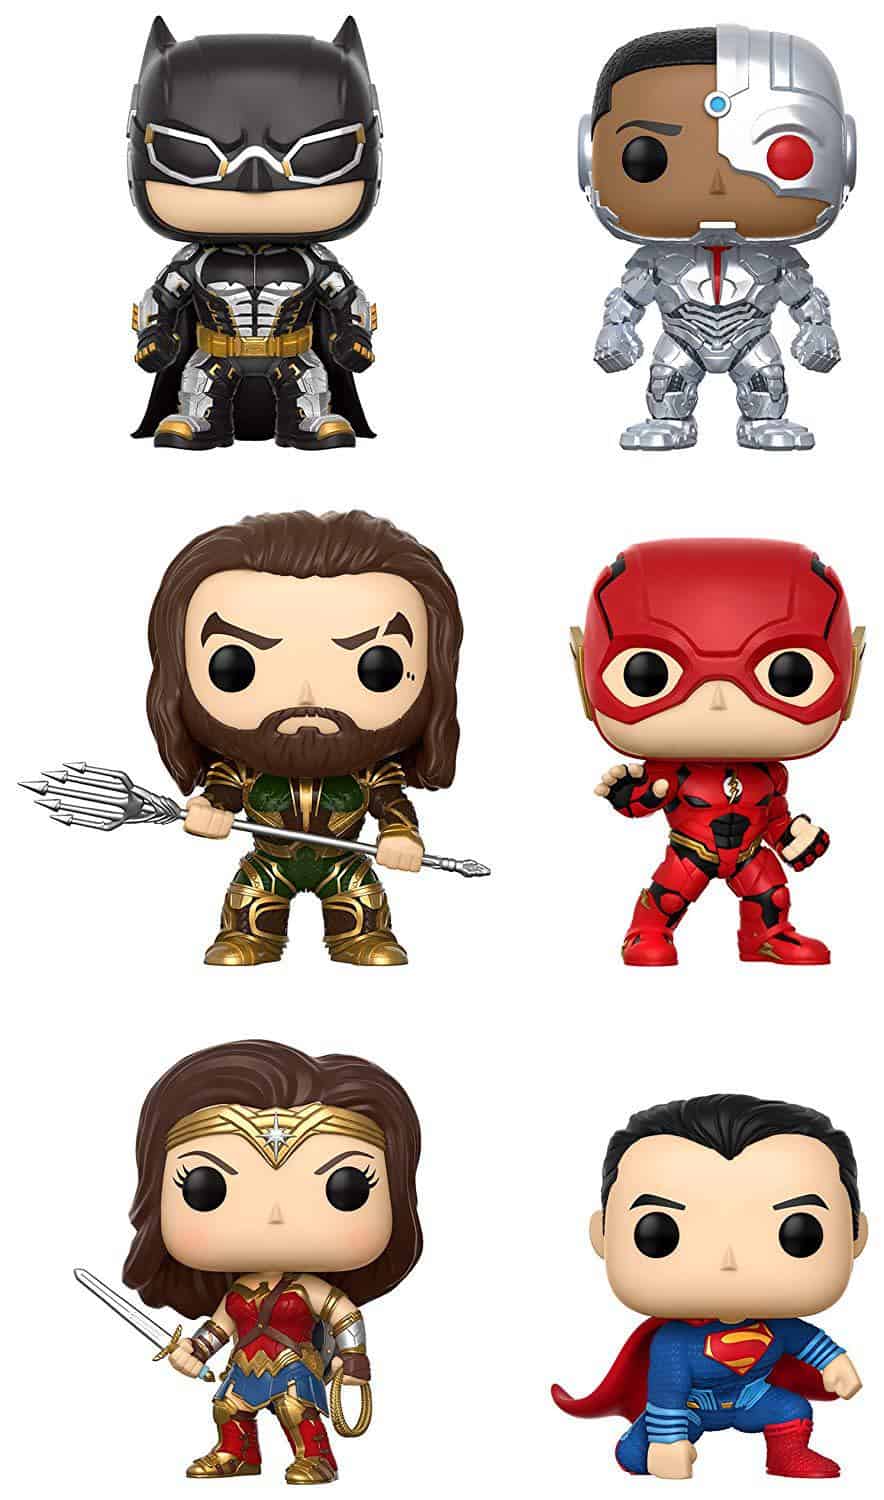 2 Unique Justice League Funko Pop Variant For You To Choose From 5